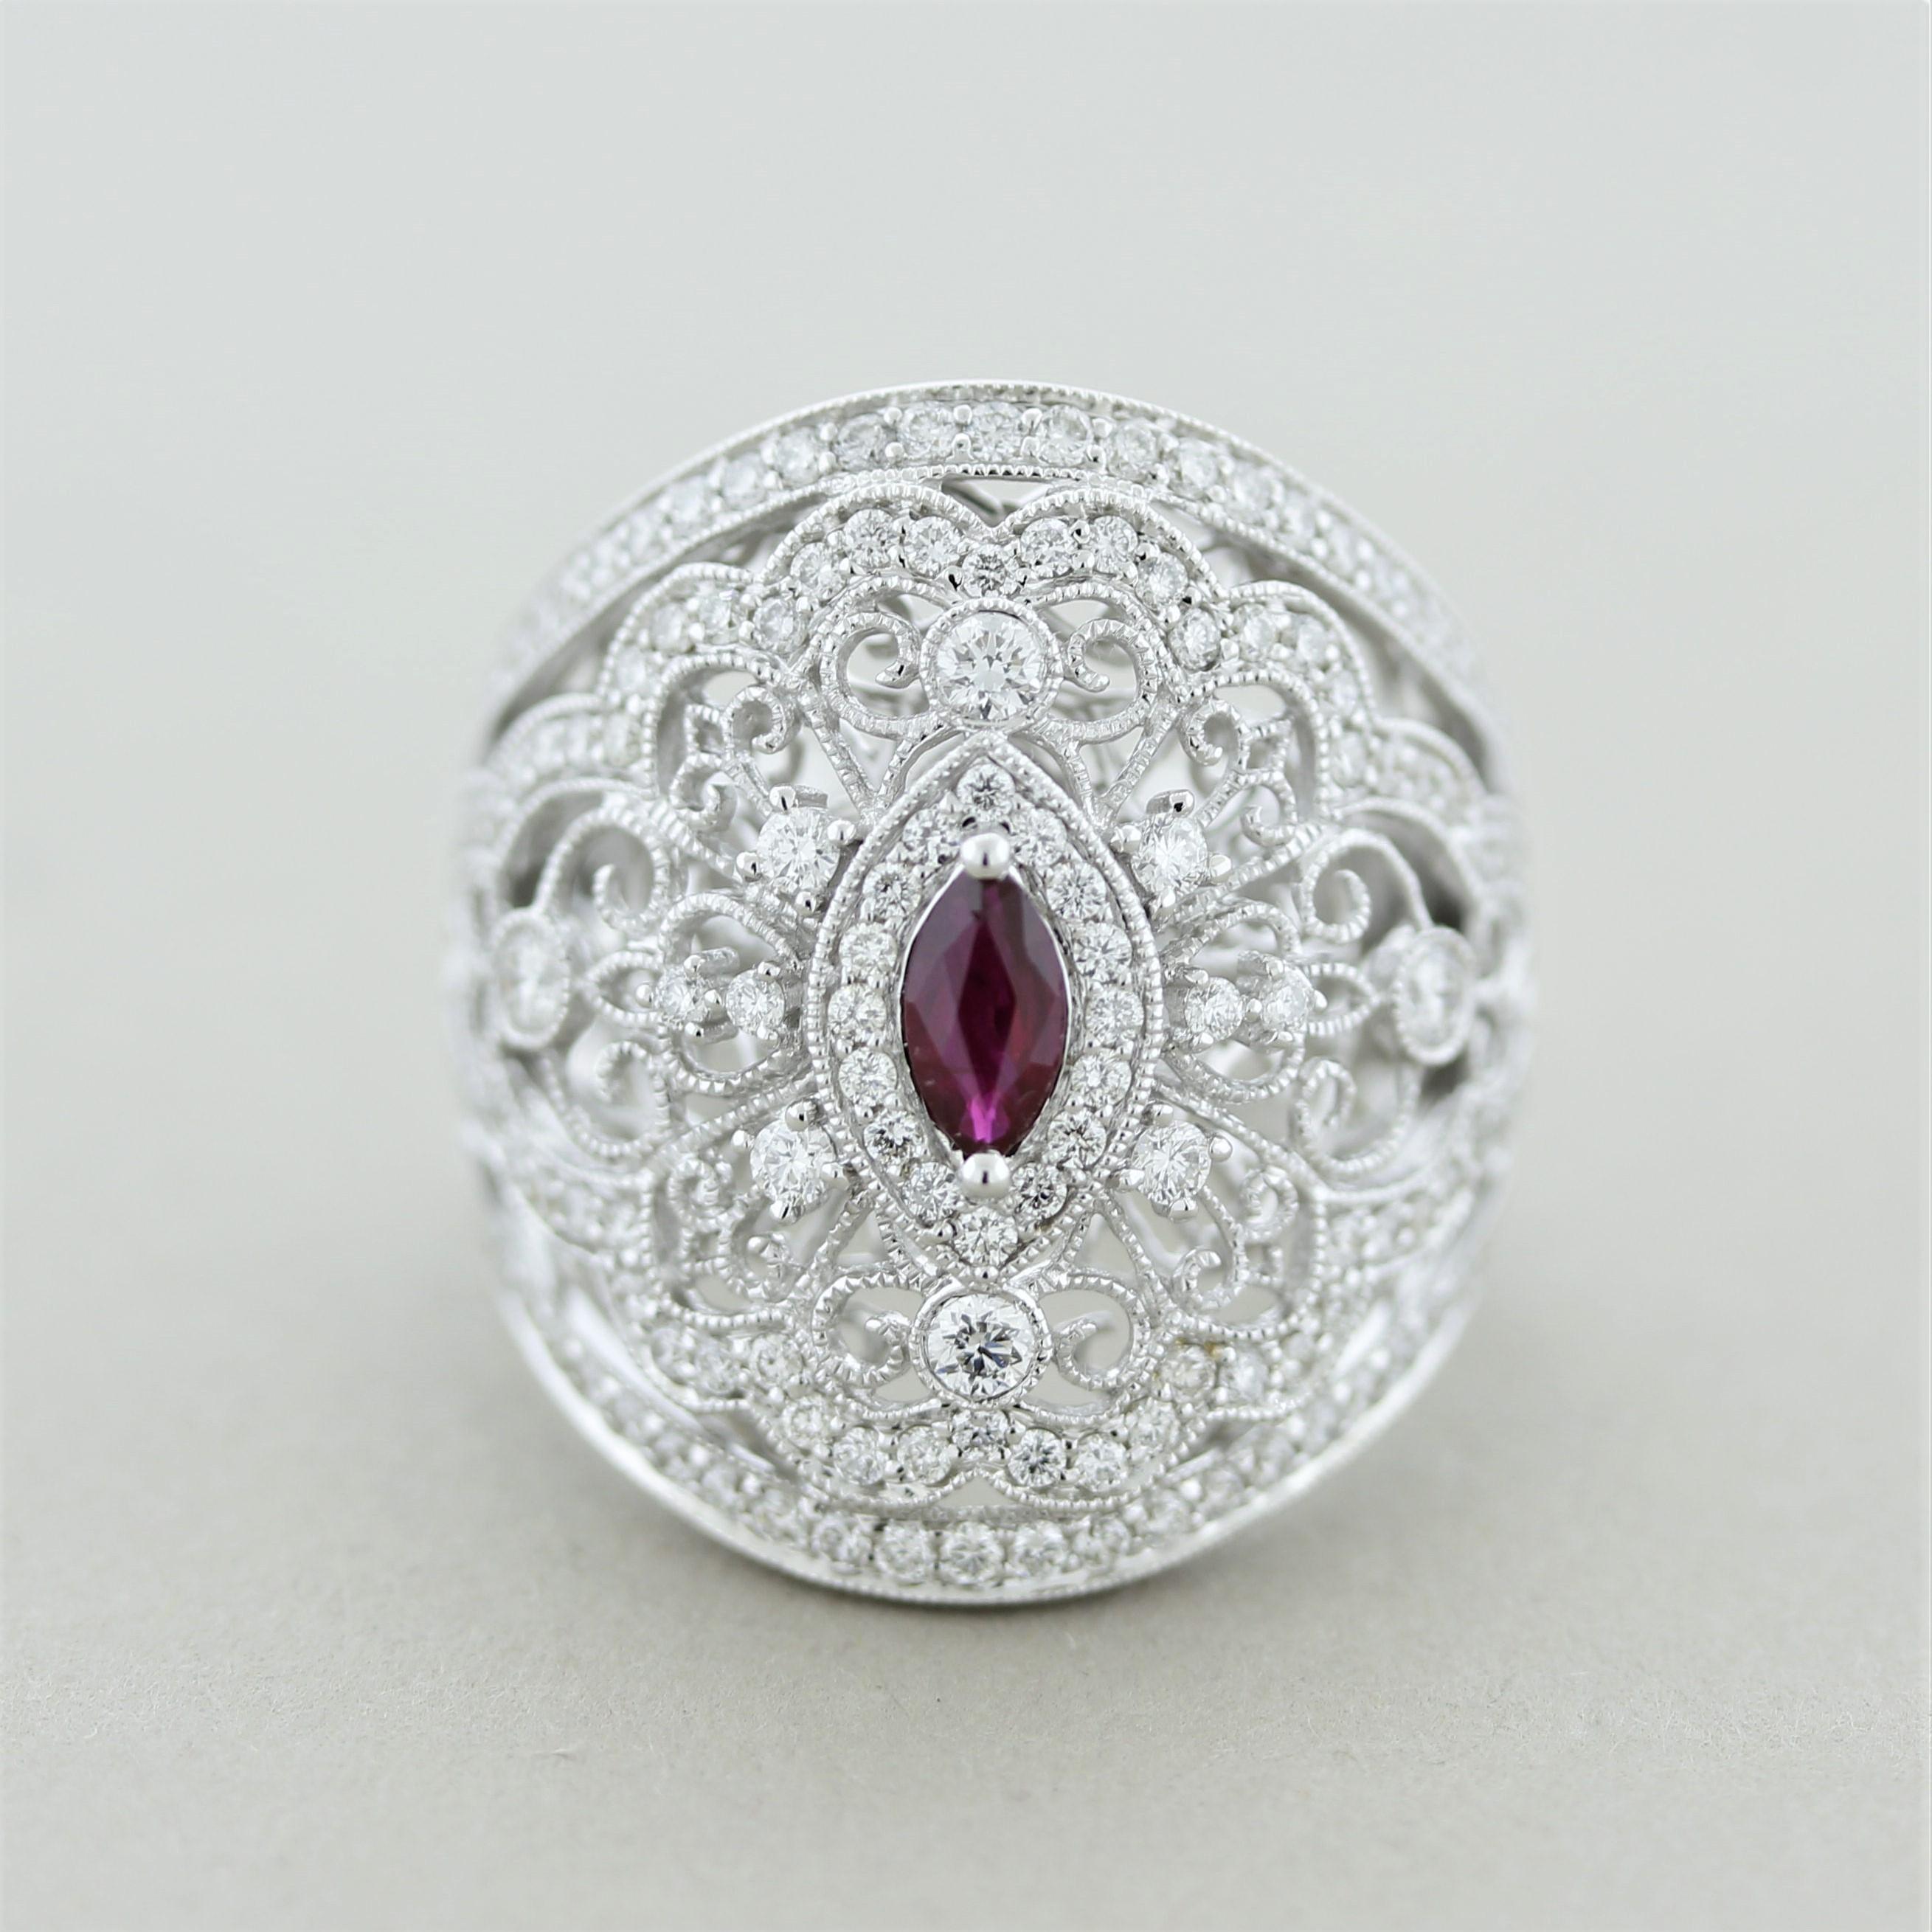 A classy ring made in the antique style with Edwardian era themes. The center ruby is a 0.26 carat marquise with a vivid red color. It is accented by 1.13 carats of round brilliant-cut diamonds. Adding to that, there is fine gold filigree work